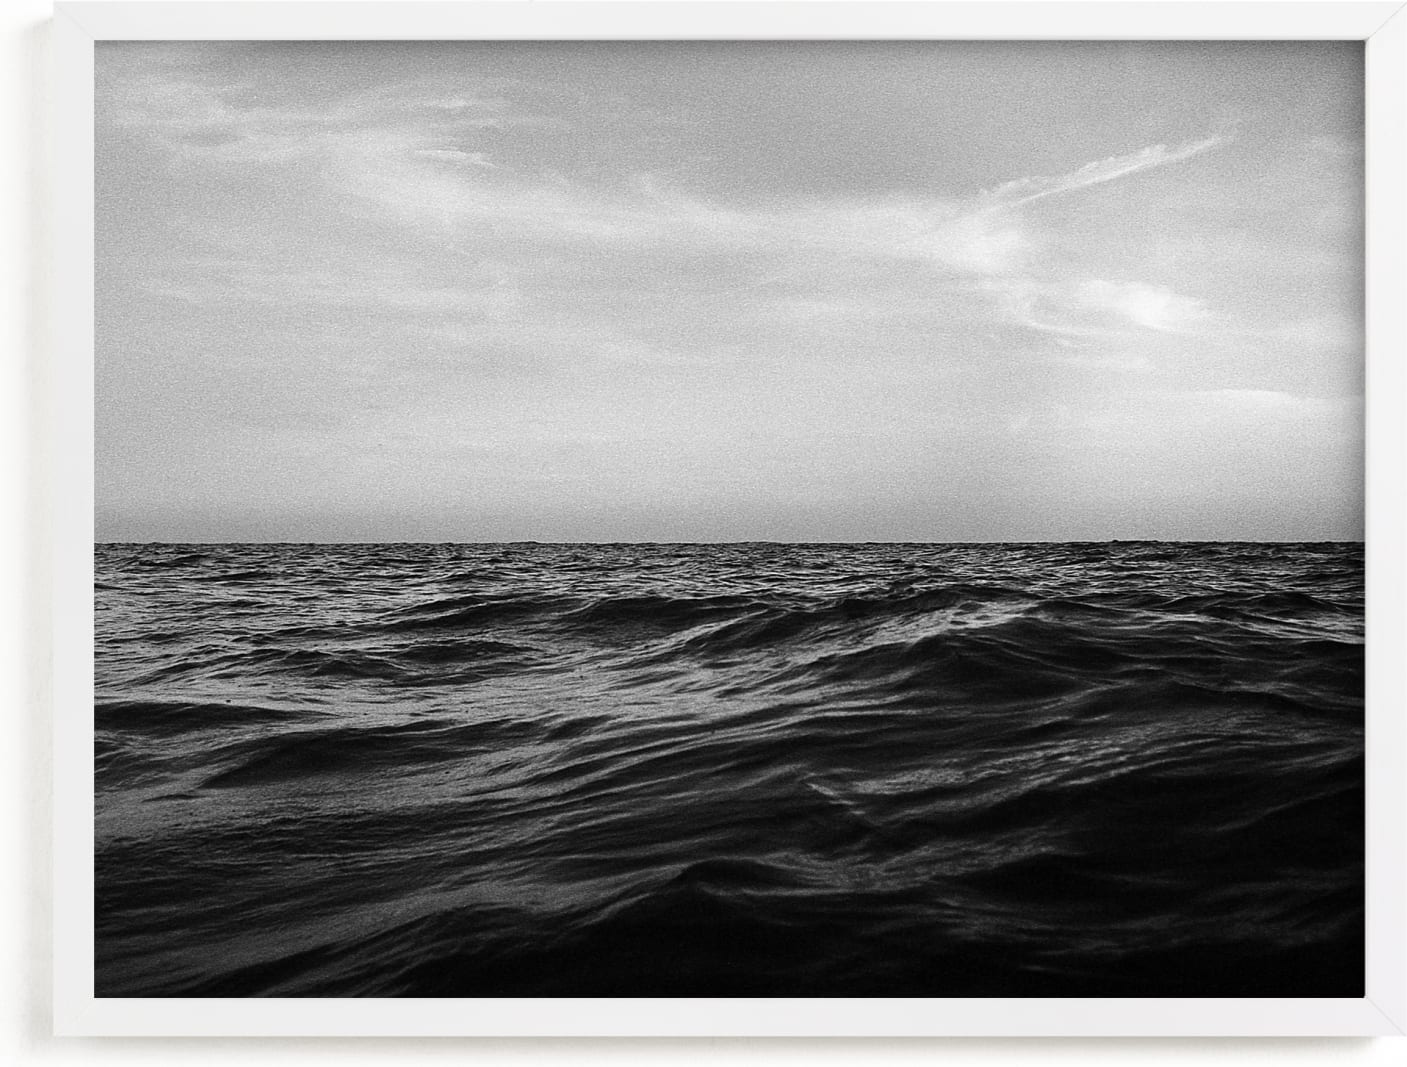 This is a black and white art by Cade Cahalan called Lost At Sea.